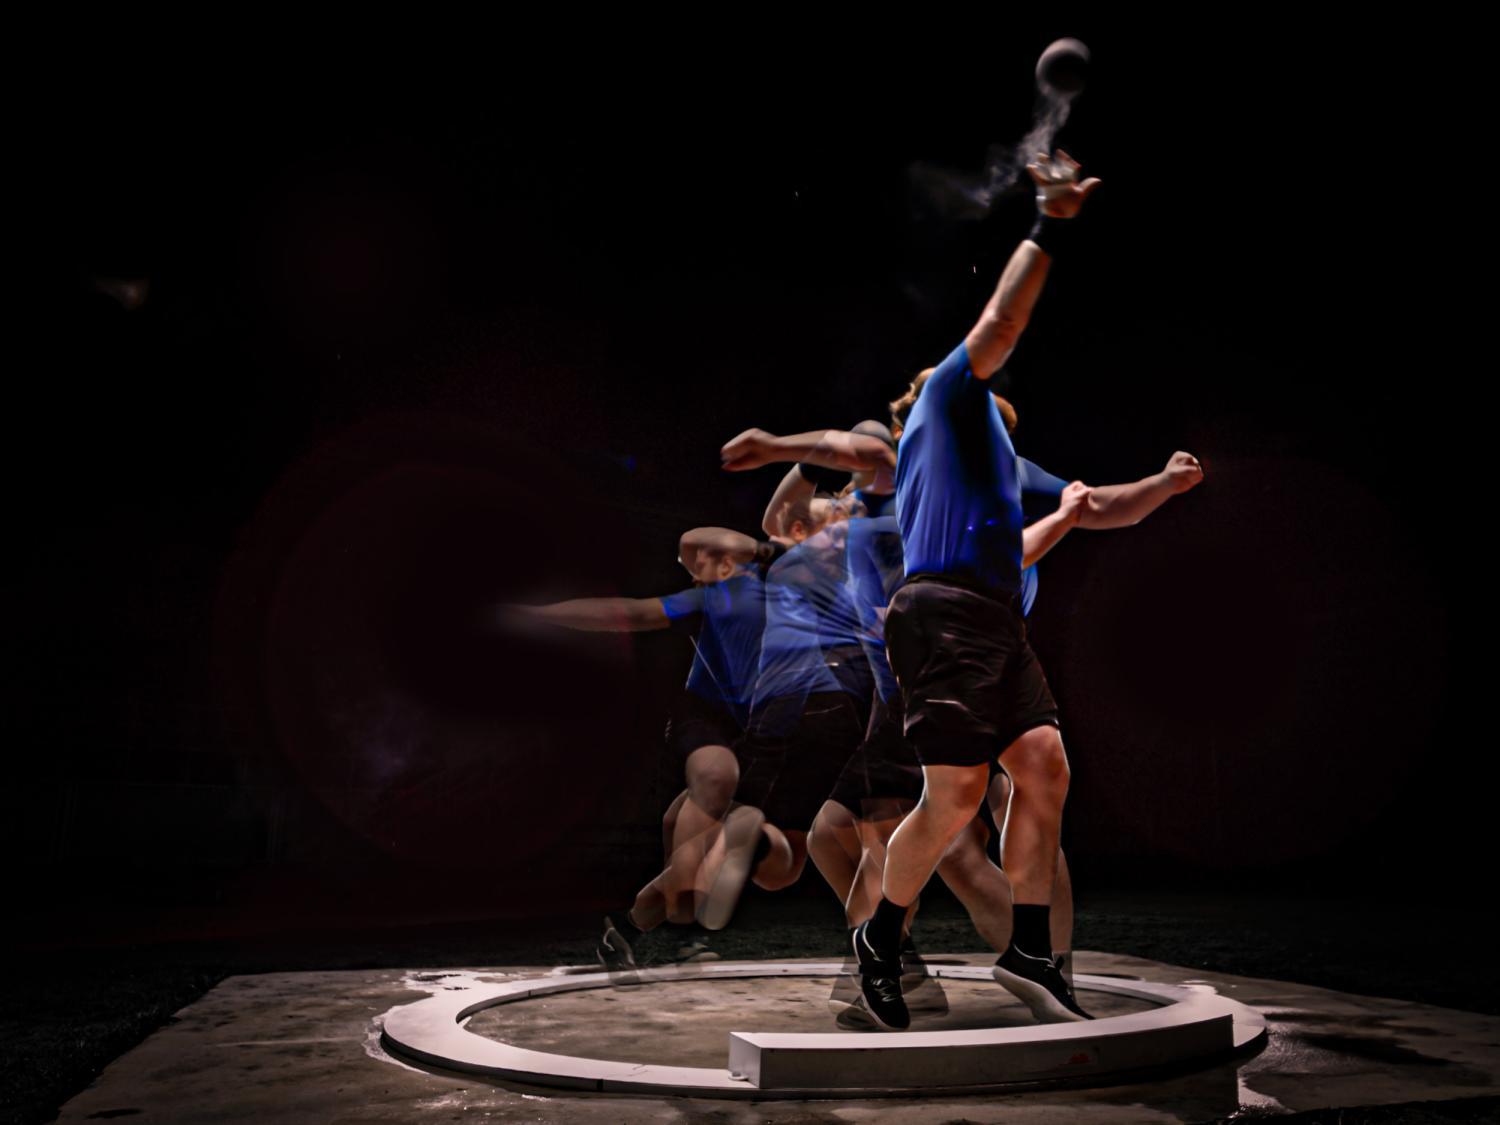 A person performs an Olympic shot put throw with a black background.